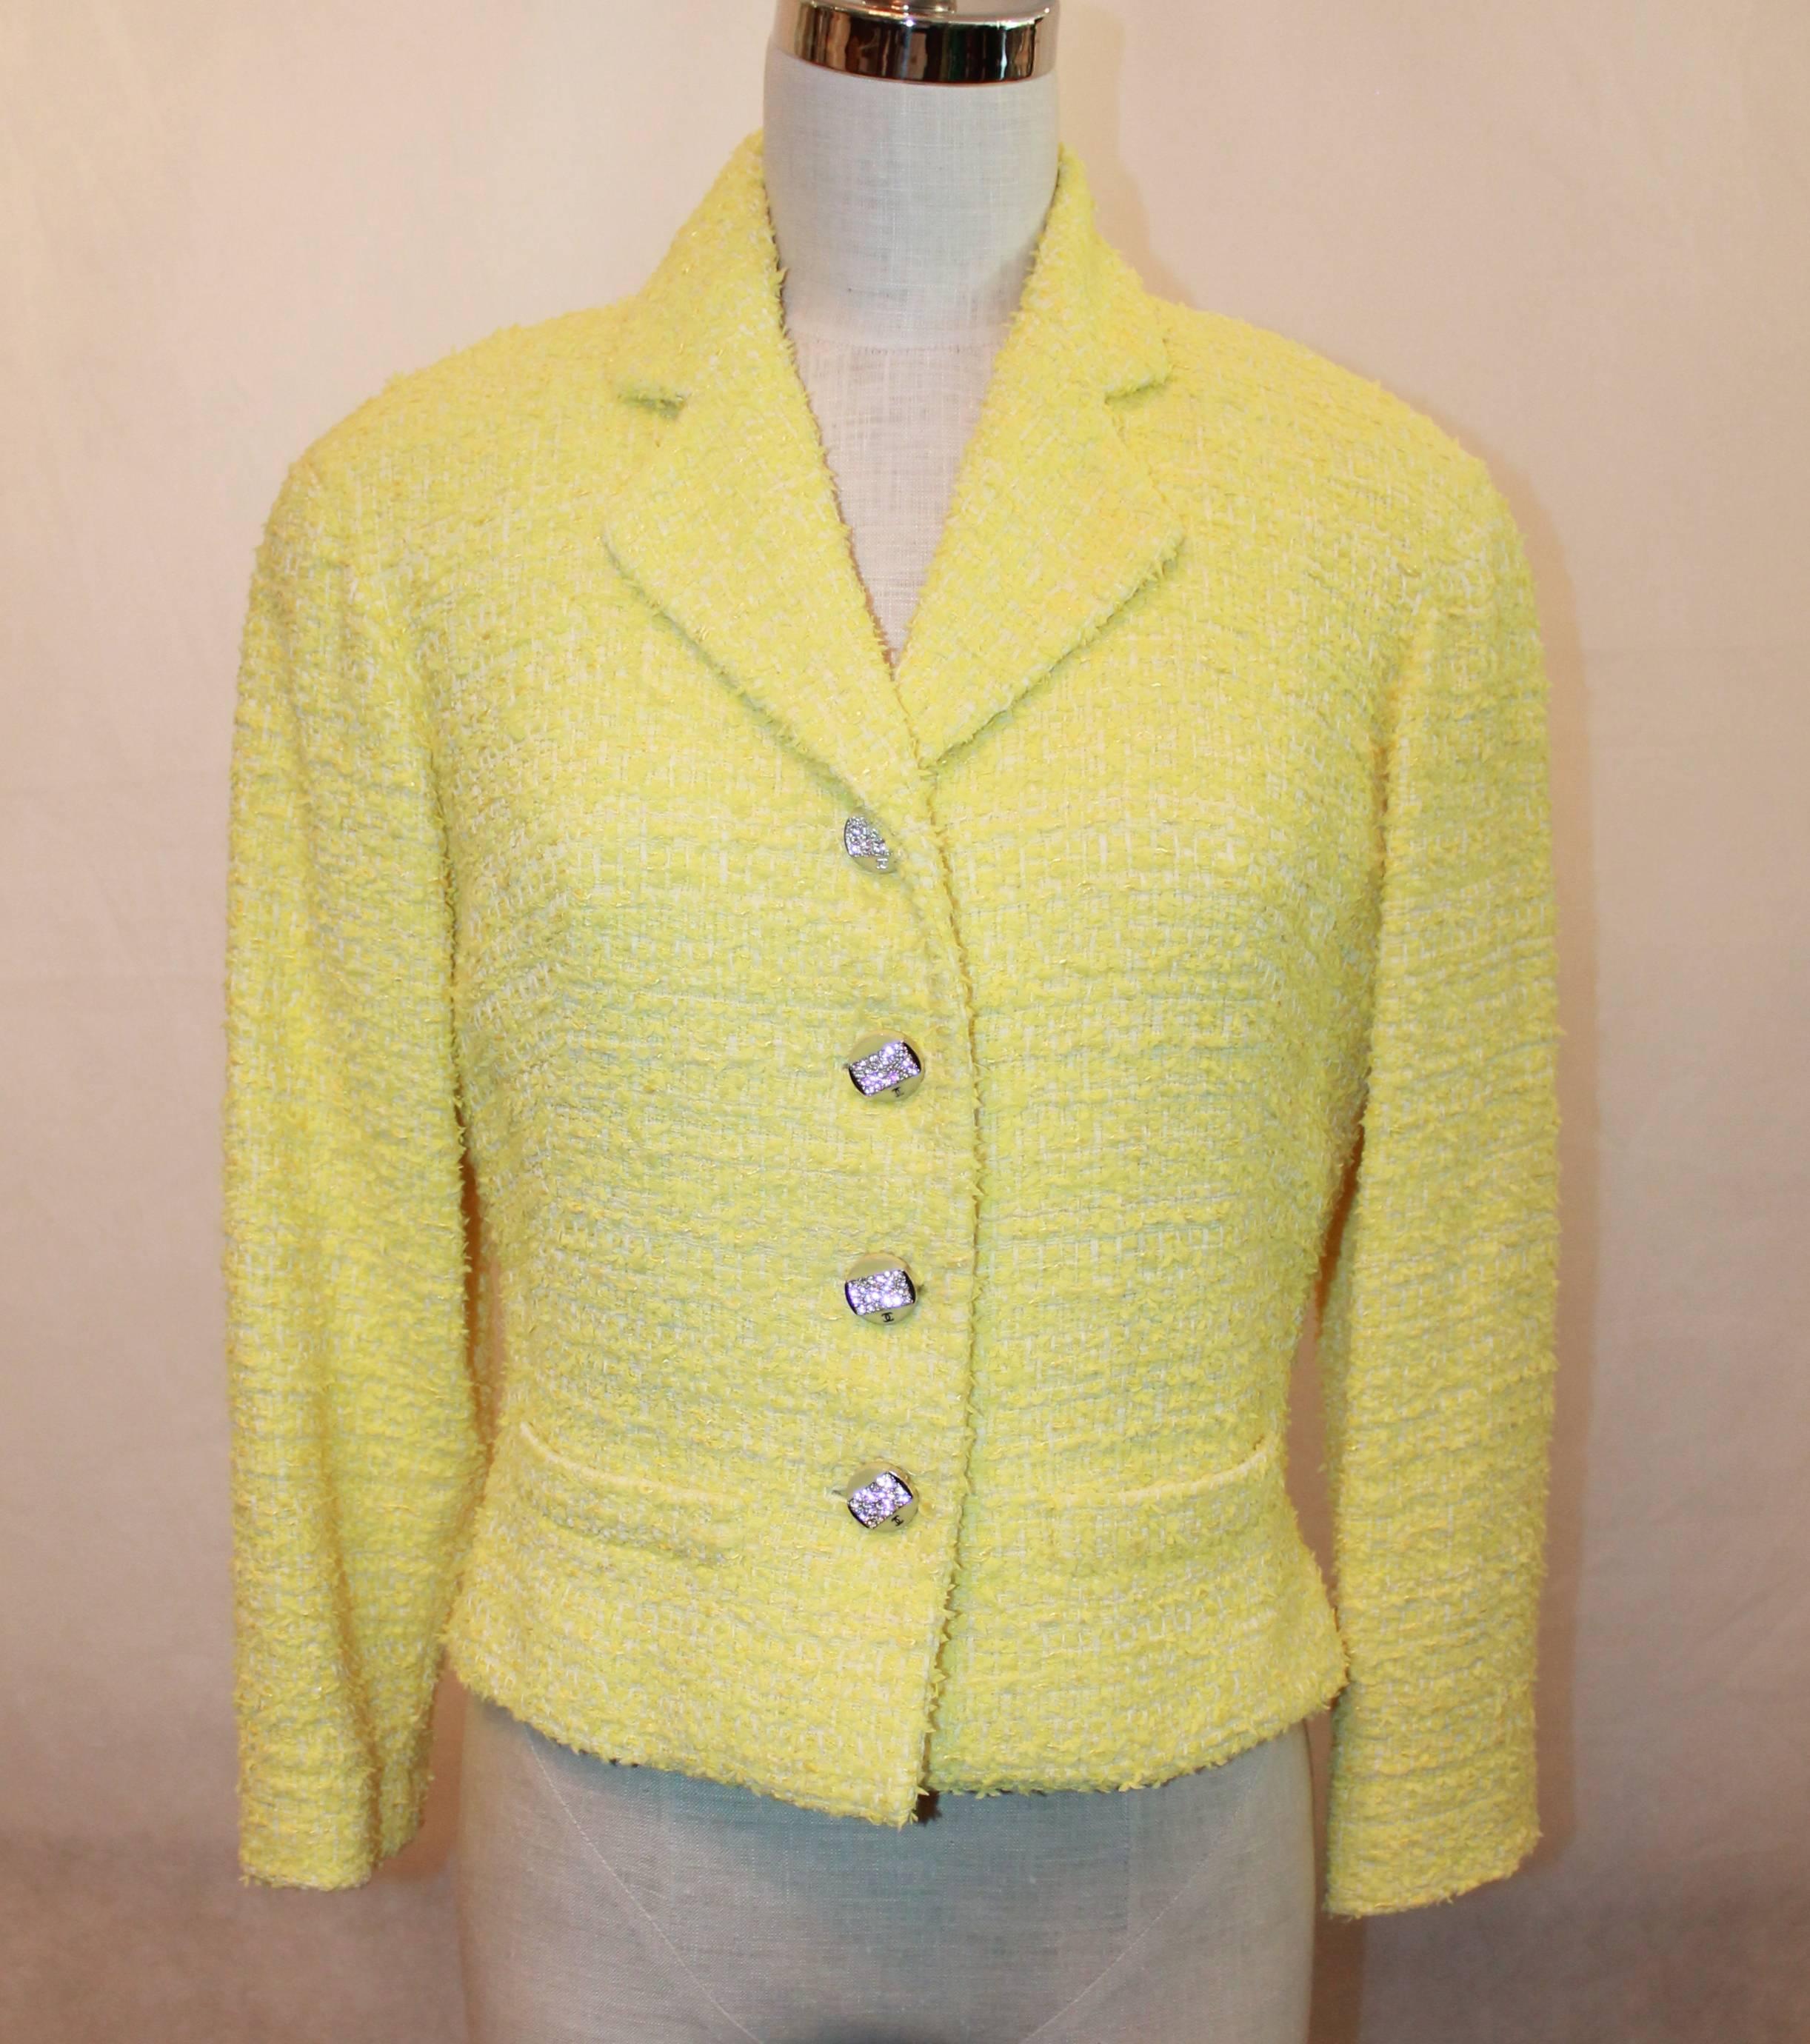 Chanel Yellow Tweed Jacket - 40.  This Chanel yellow tweed jacket is in excellent condition.  It has 4 yellow enamel and rhinestone Chanel buttons going down the center front.  It has two low front pockets.  It has a gold chain along the inside